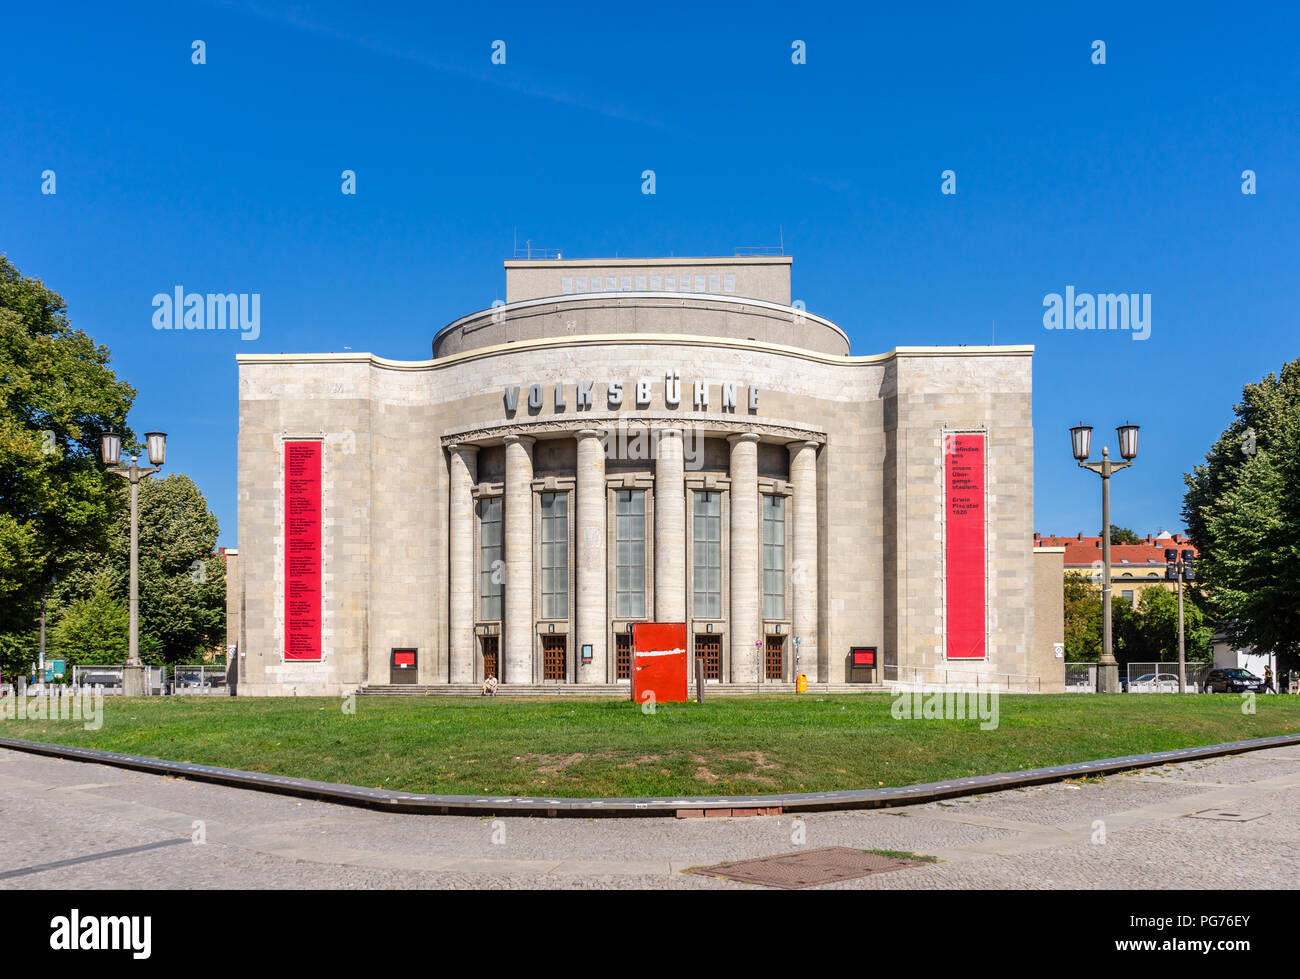 The People's Theatre (Volksbuehne) in the Berlin Mitte district, an iconic theatre built 1913-1914 near Rosa-Luxemburg Platz, Berlin, Germany Stock Photo